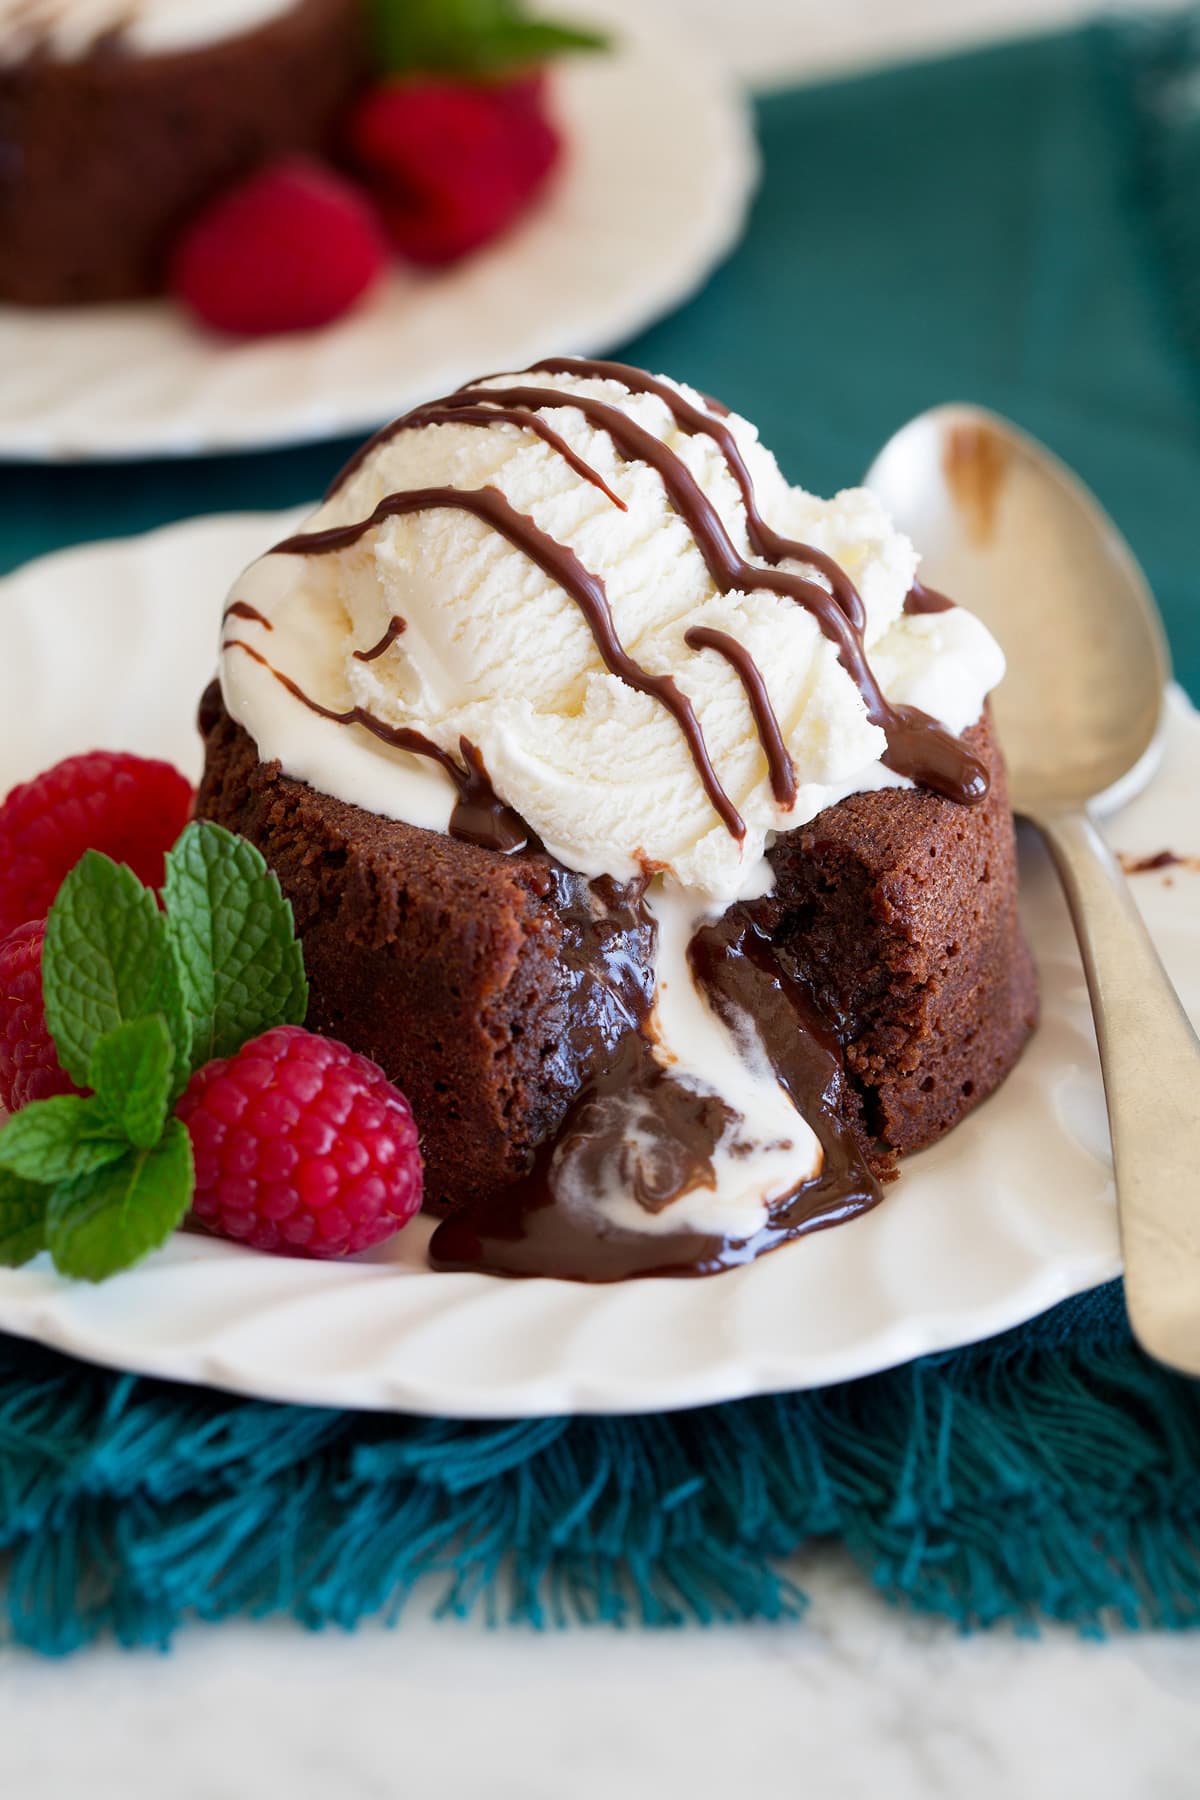 Chocolate lava cake on a serving plate with ice cream on top. Raspberries are shown to the side.